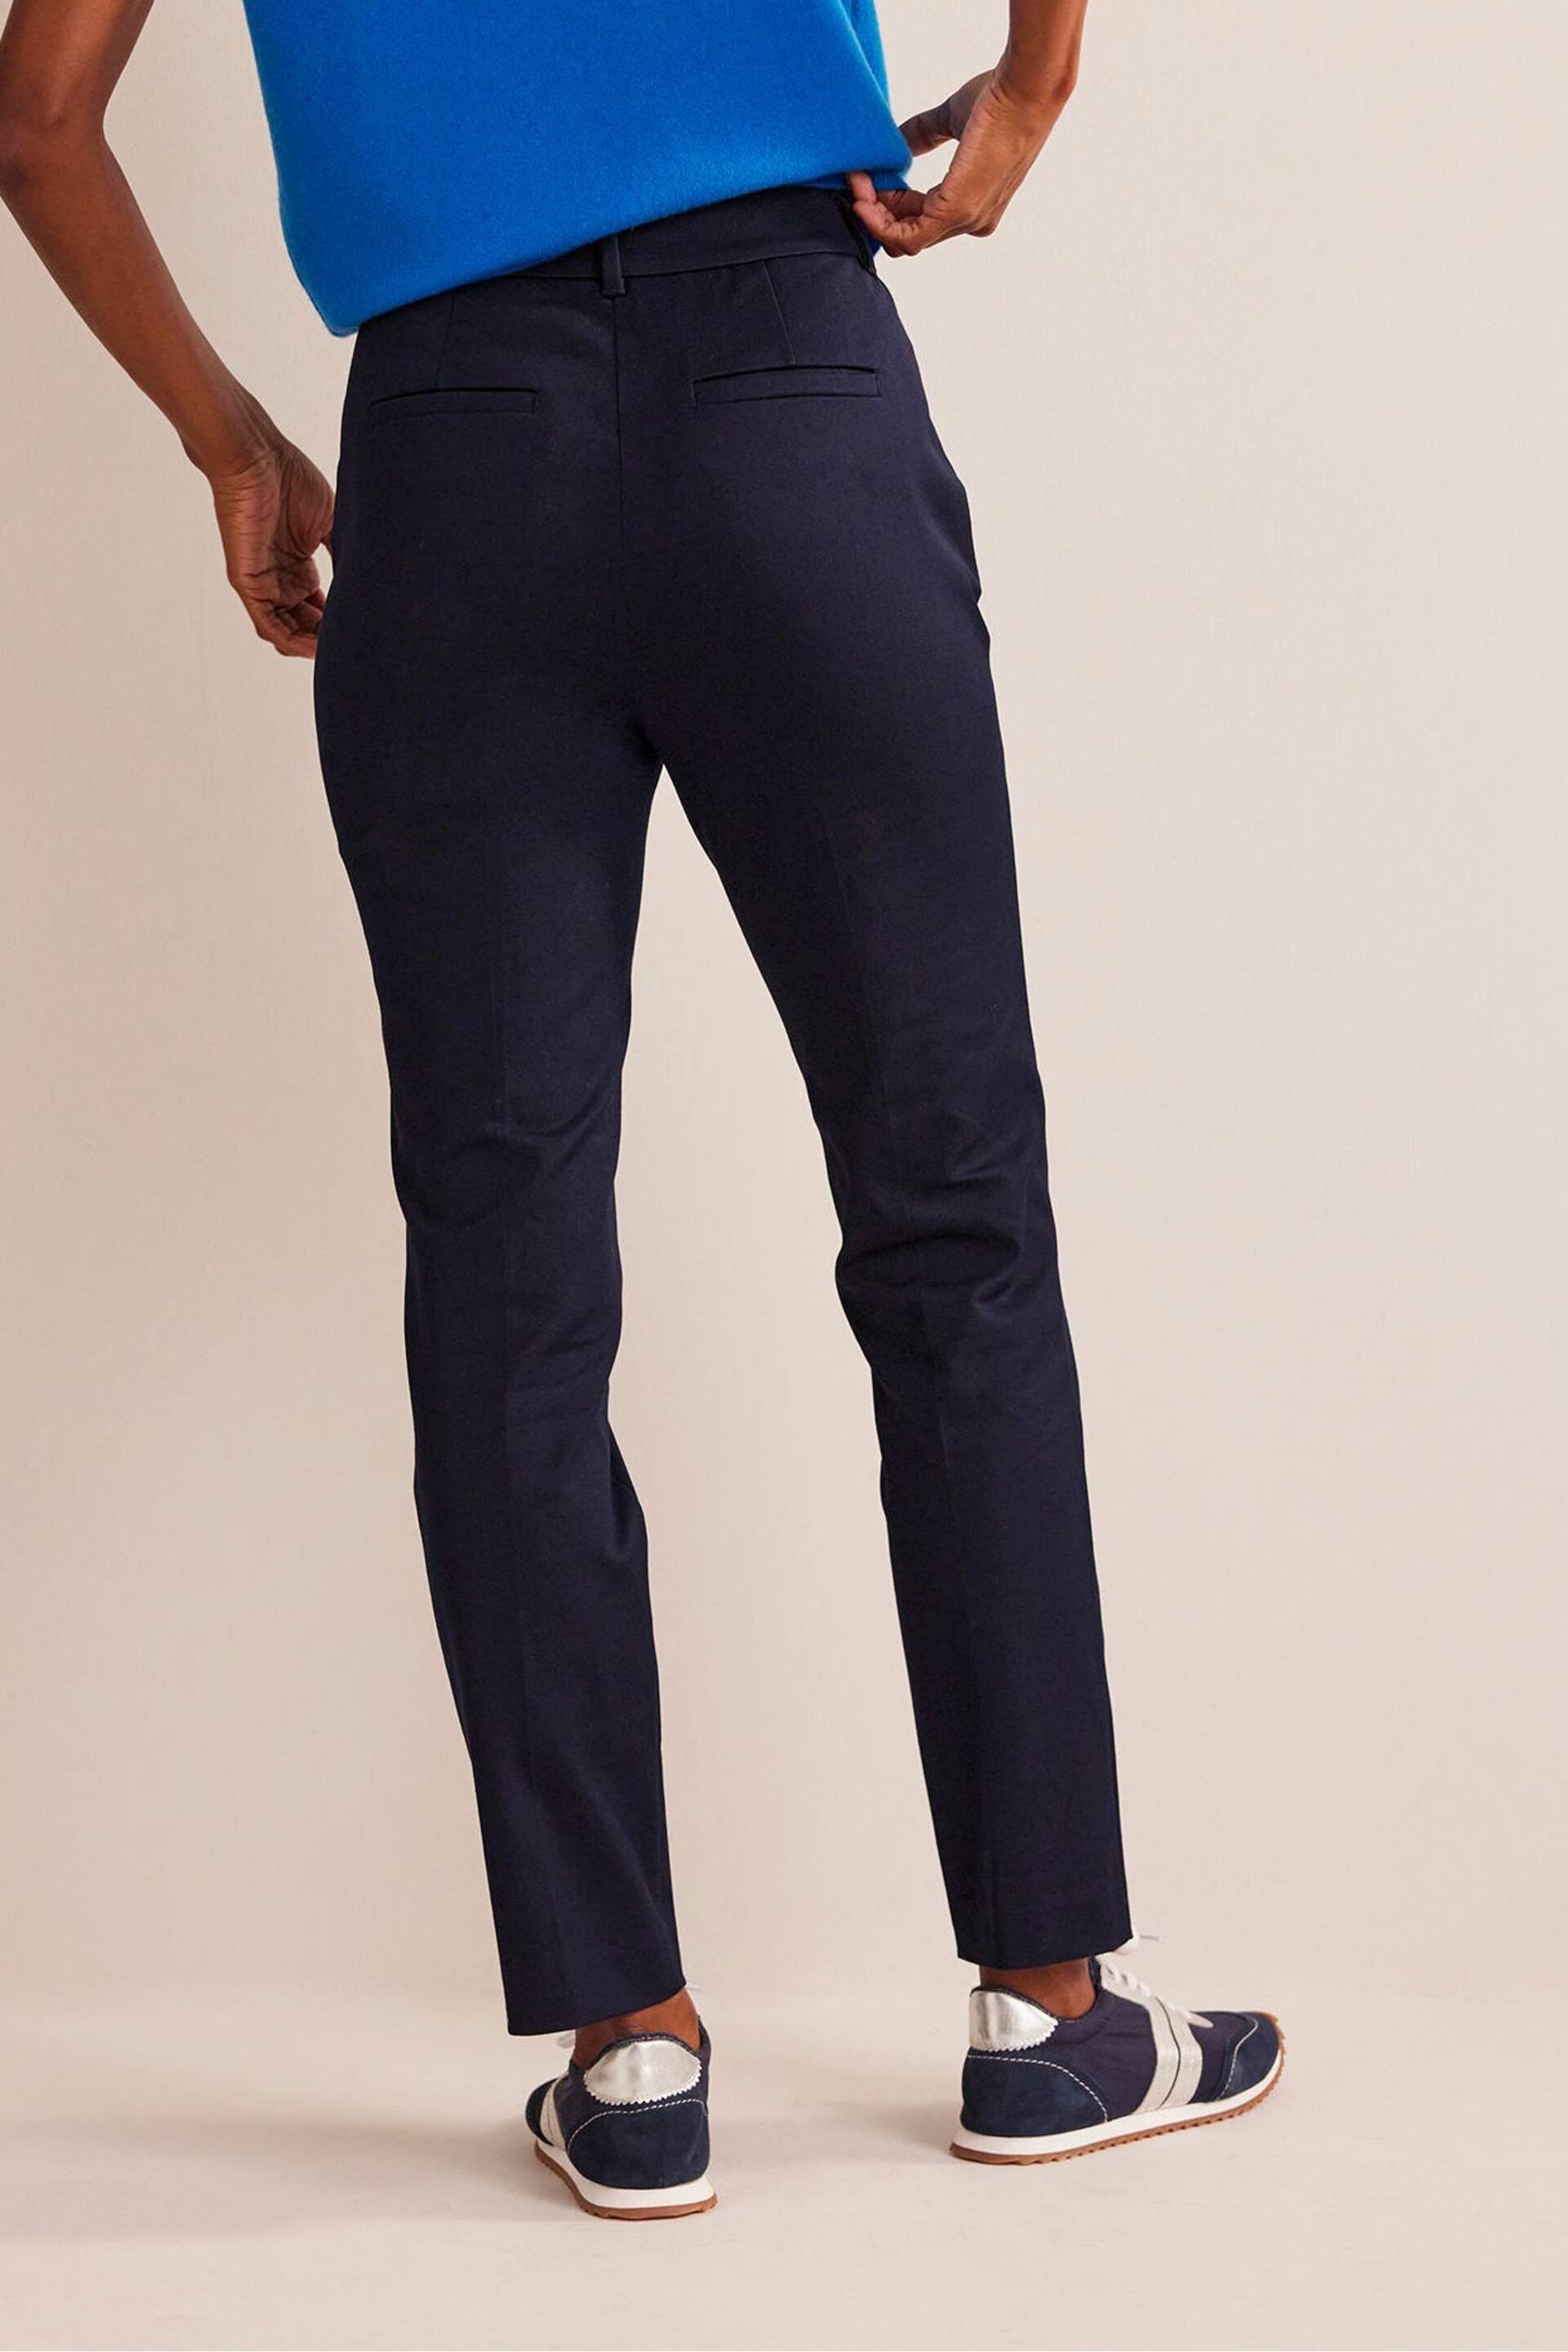 Boden Navy Highgate Bi-Stretch Trousers - Image 2 of 5